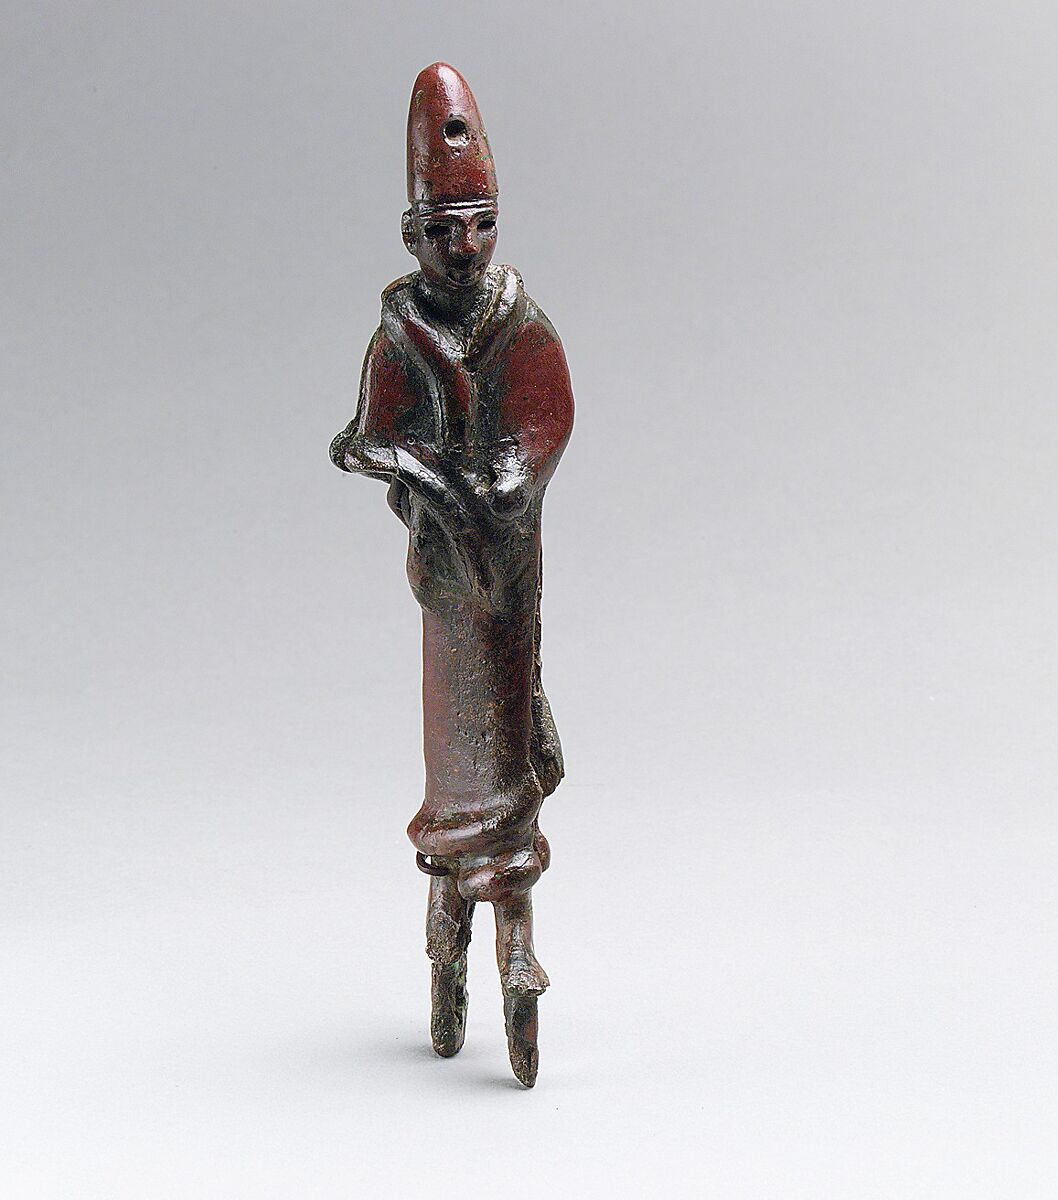 Royal or divine figure with high conical headdress, Bronze 